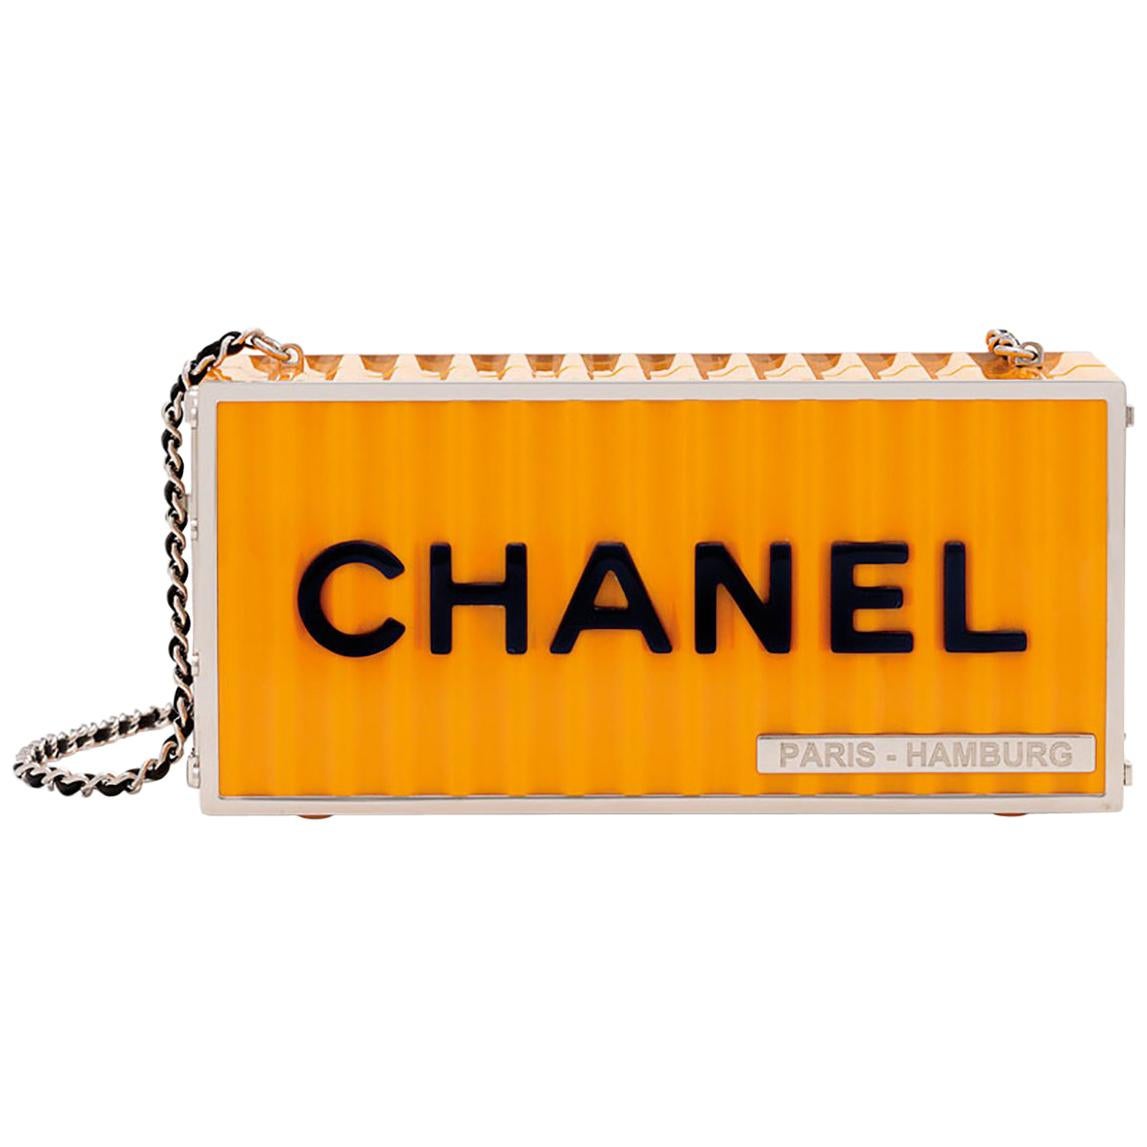 Chanel Clutch Paris-hamburg Lucite Shipping Container Yellow Shoulder Bag